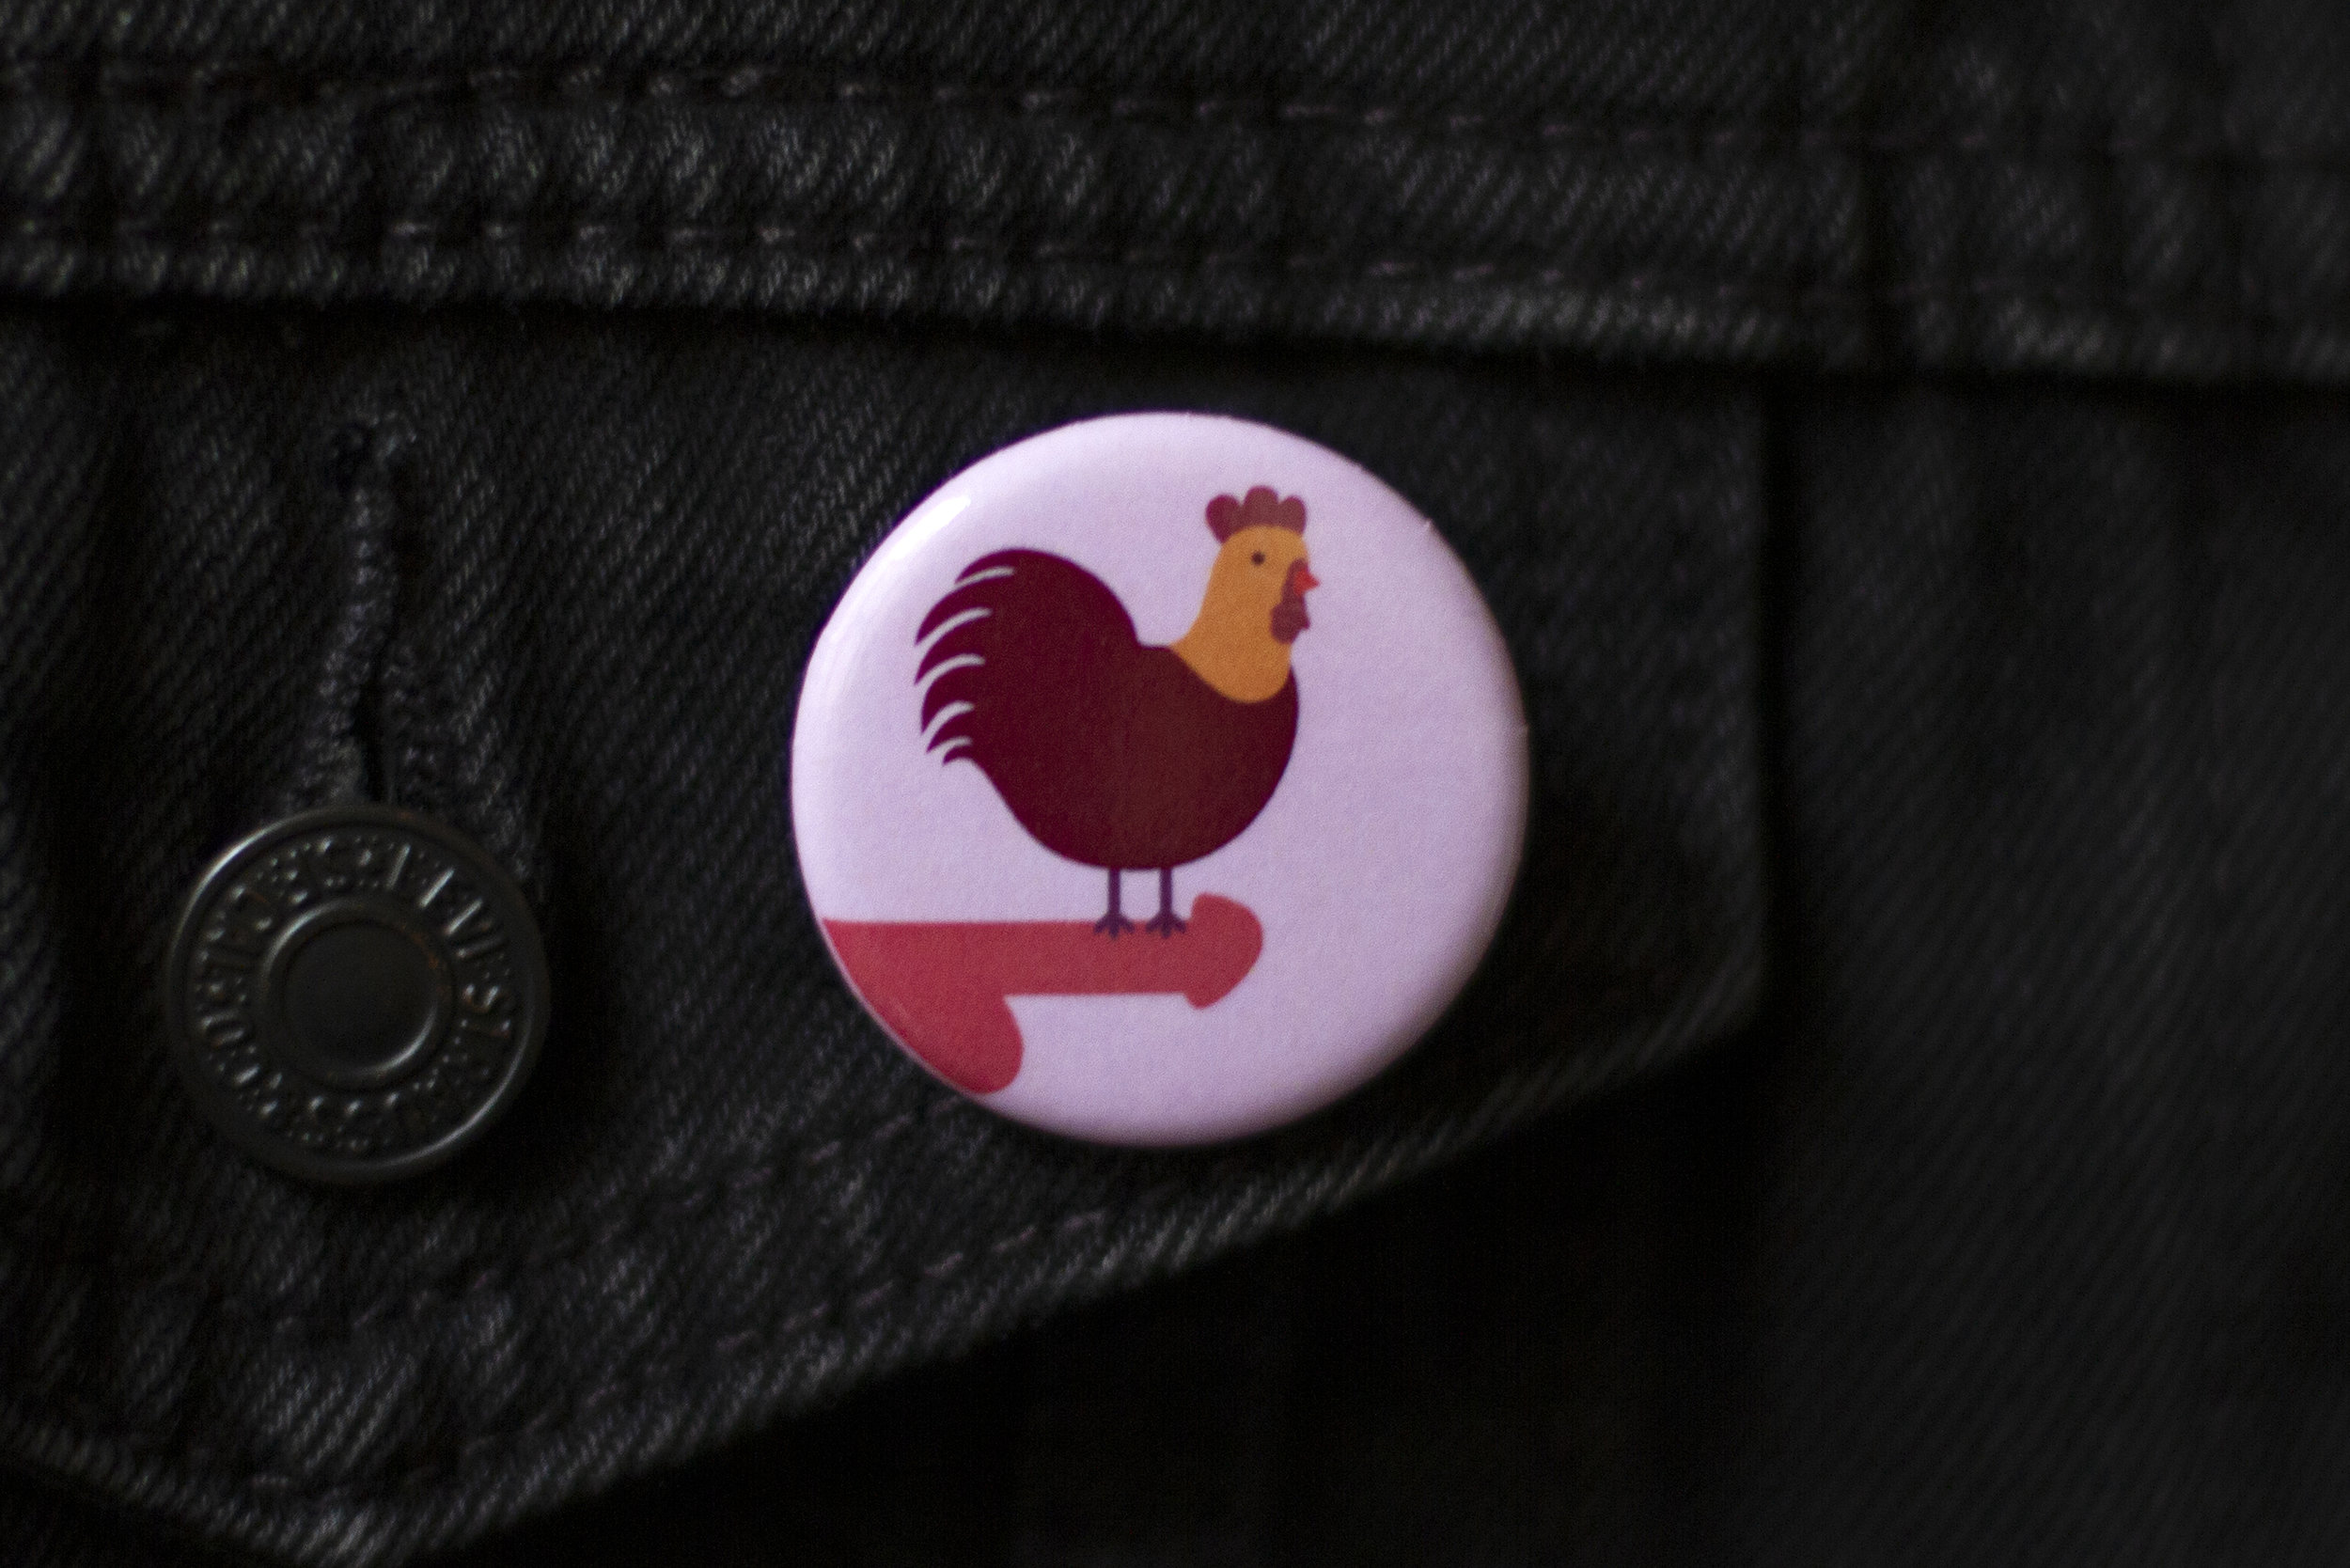 Morning Wood art button by CockBloq pinned on a denim jacket